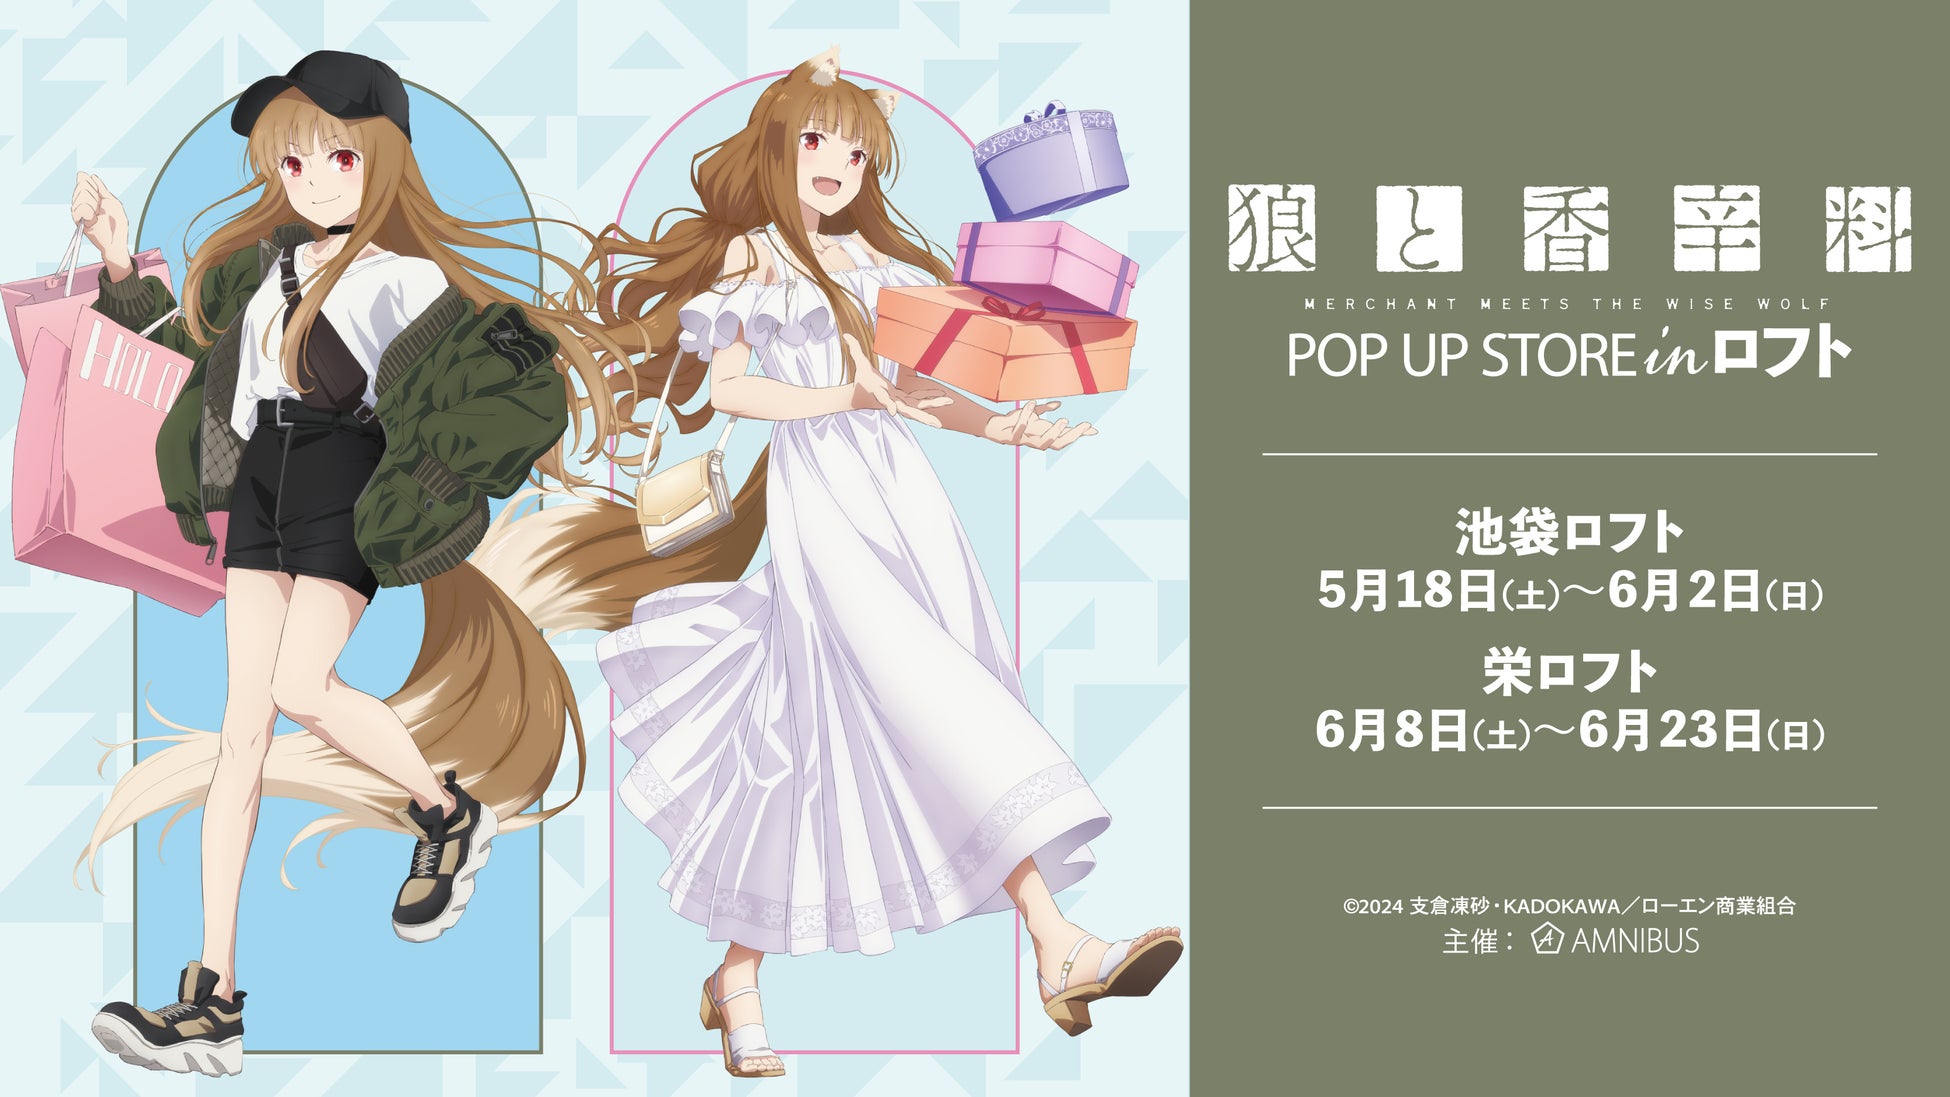 「TVアニメ『狼と香辛料 MERCHANT MEETS THE WISE WOLF』POP UP STORE in ロフト」の開催が決定！